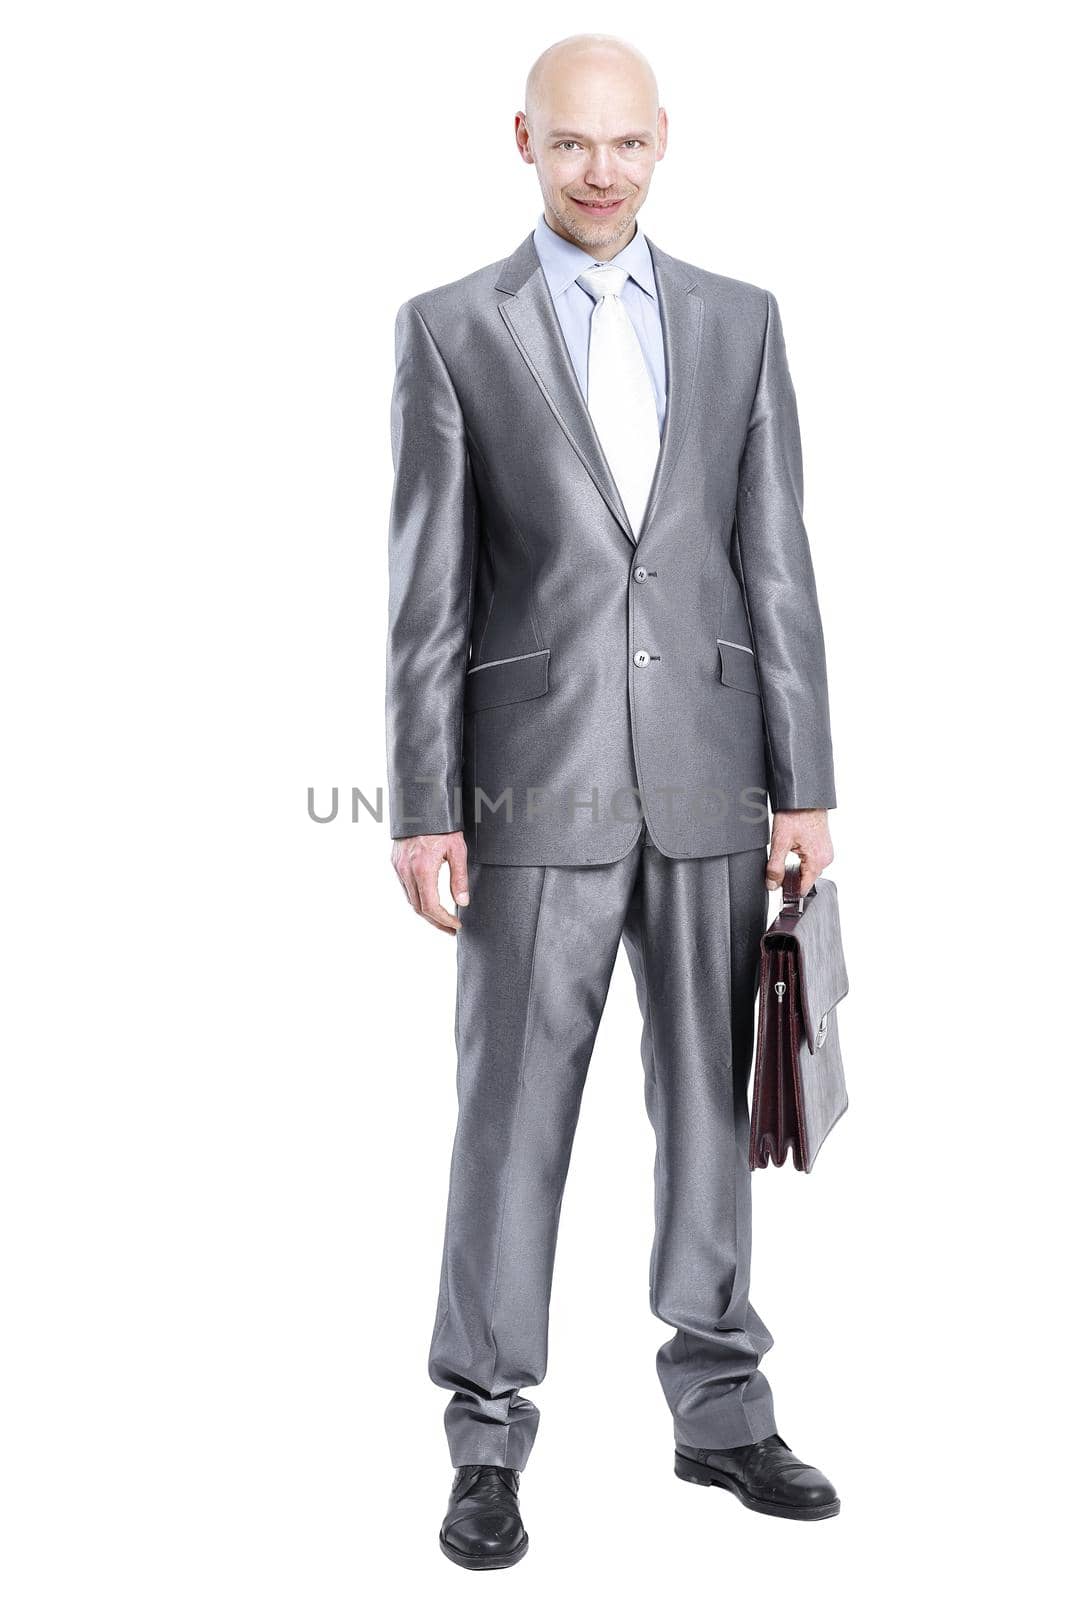 in full growth.handsome businessman with a leather briefcase.is by SmartPhotoLab